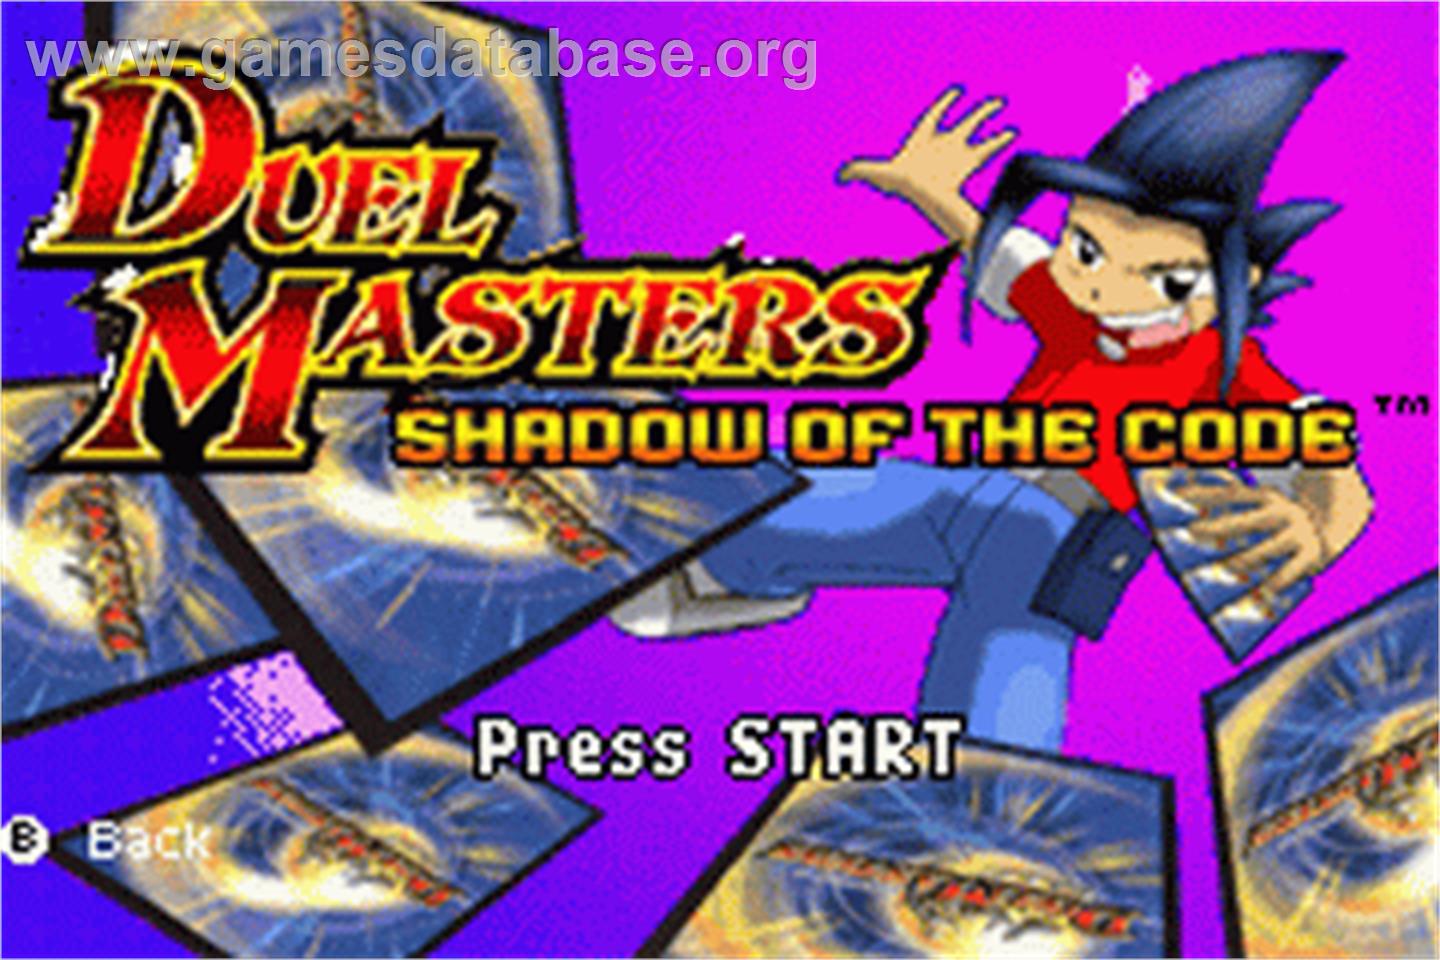 Duel Masters Shadow of the Code - Nintendo Game Boy Advance - Artwork - Title Screen